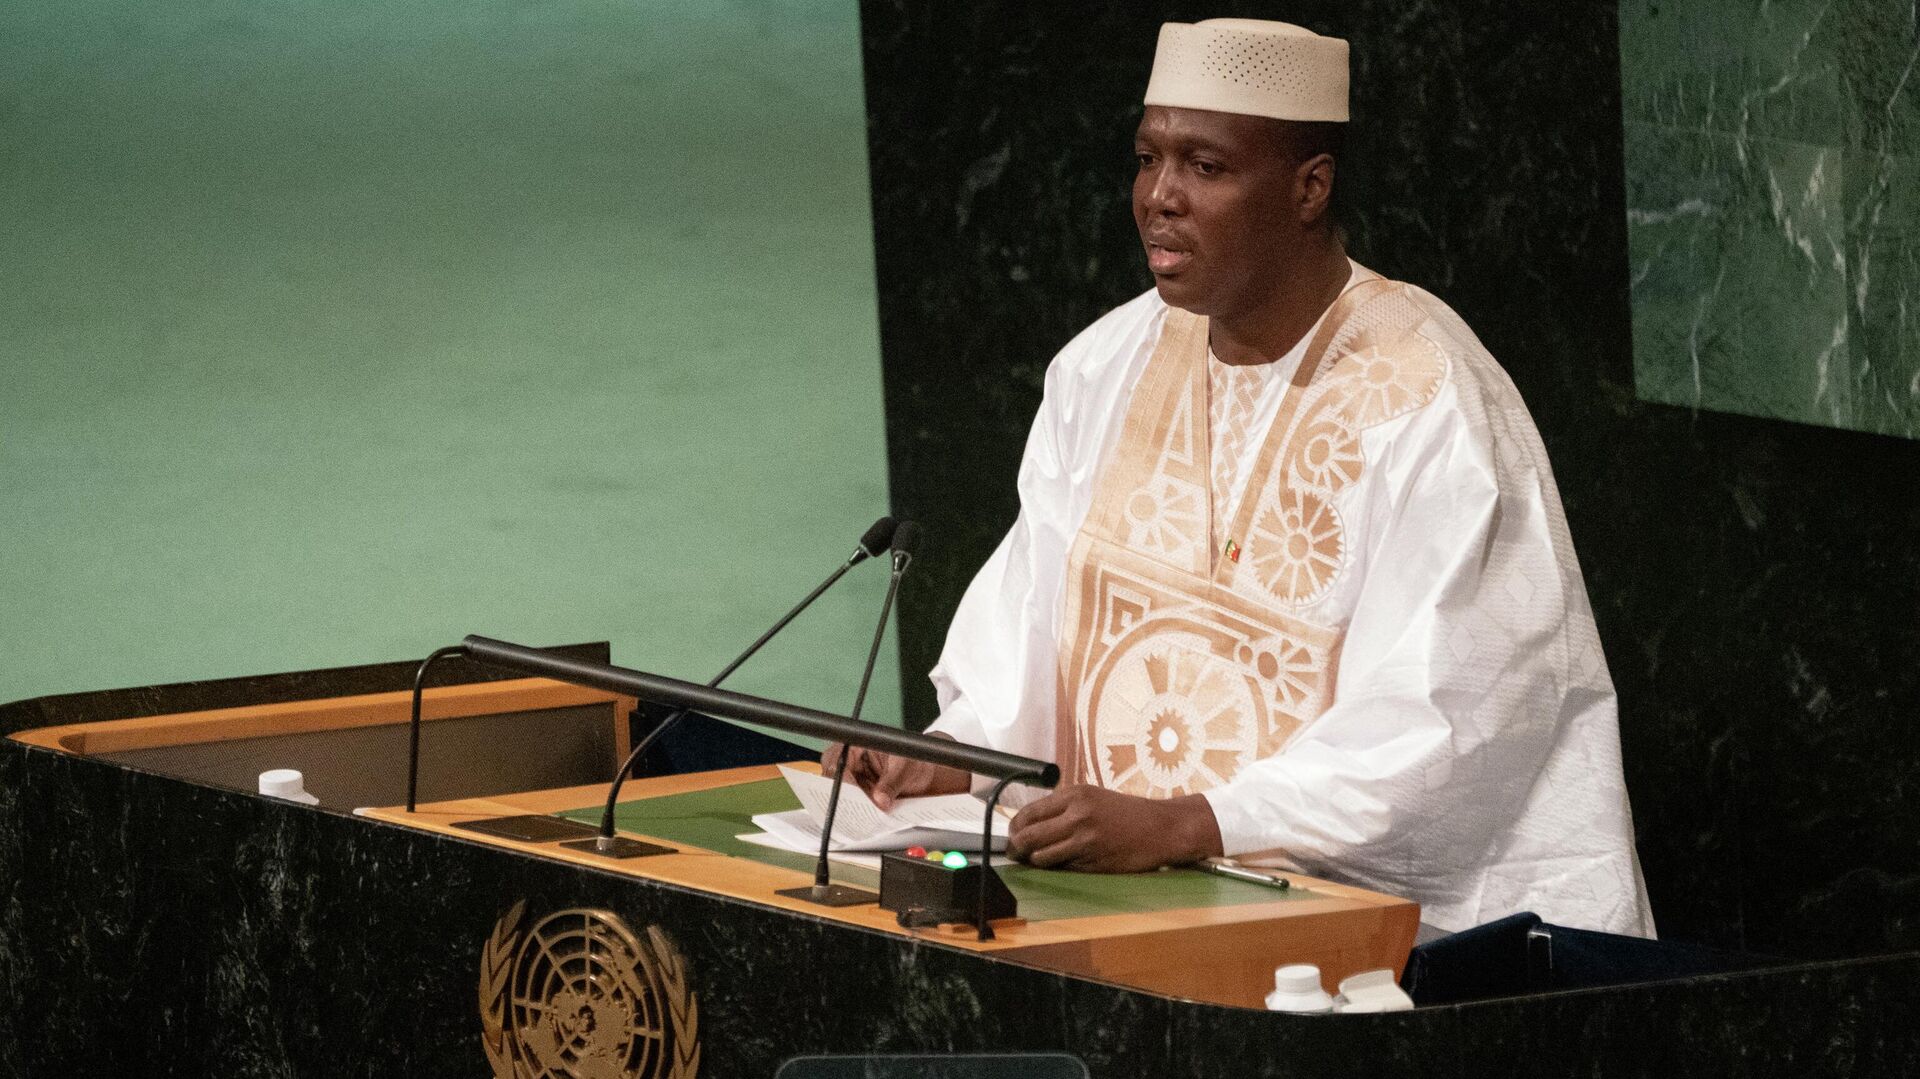 Acting Prime Minister of Mali Abdoulaye Maiga addresses the 77th session of the United Nations General Assembly at UN headquarters in New York City on September 24, 2022. (Photo by Bryan R. Smith / AFP) - Sputnik International, 1920, 25.09.2022